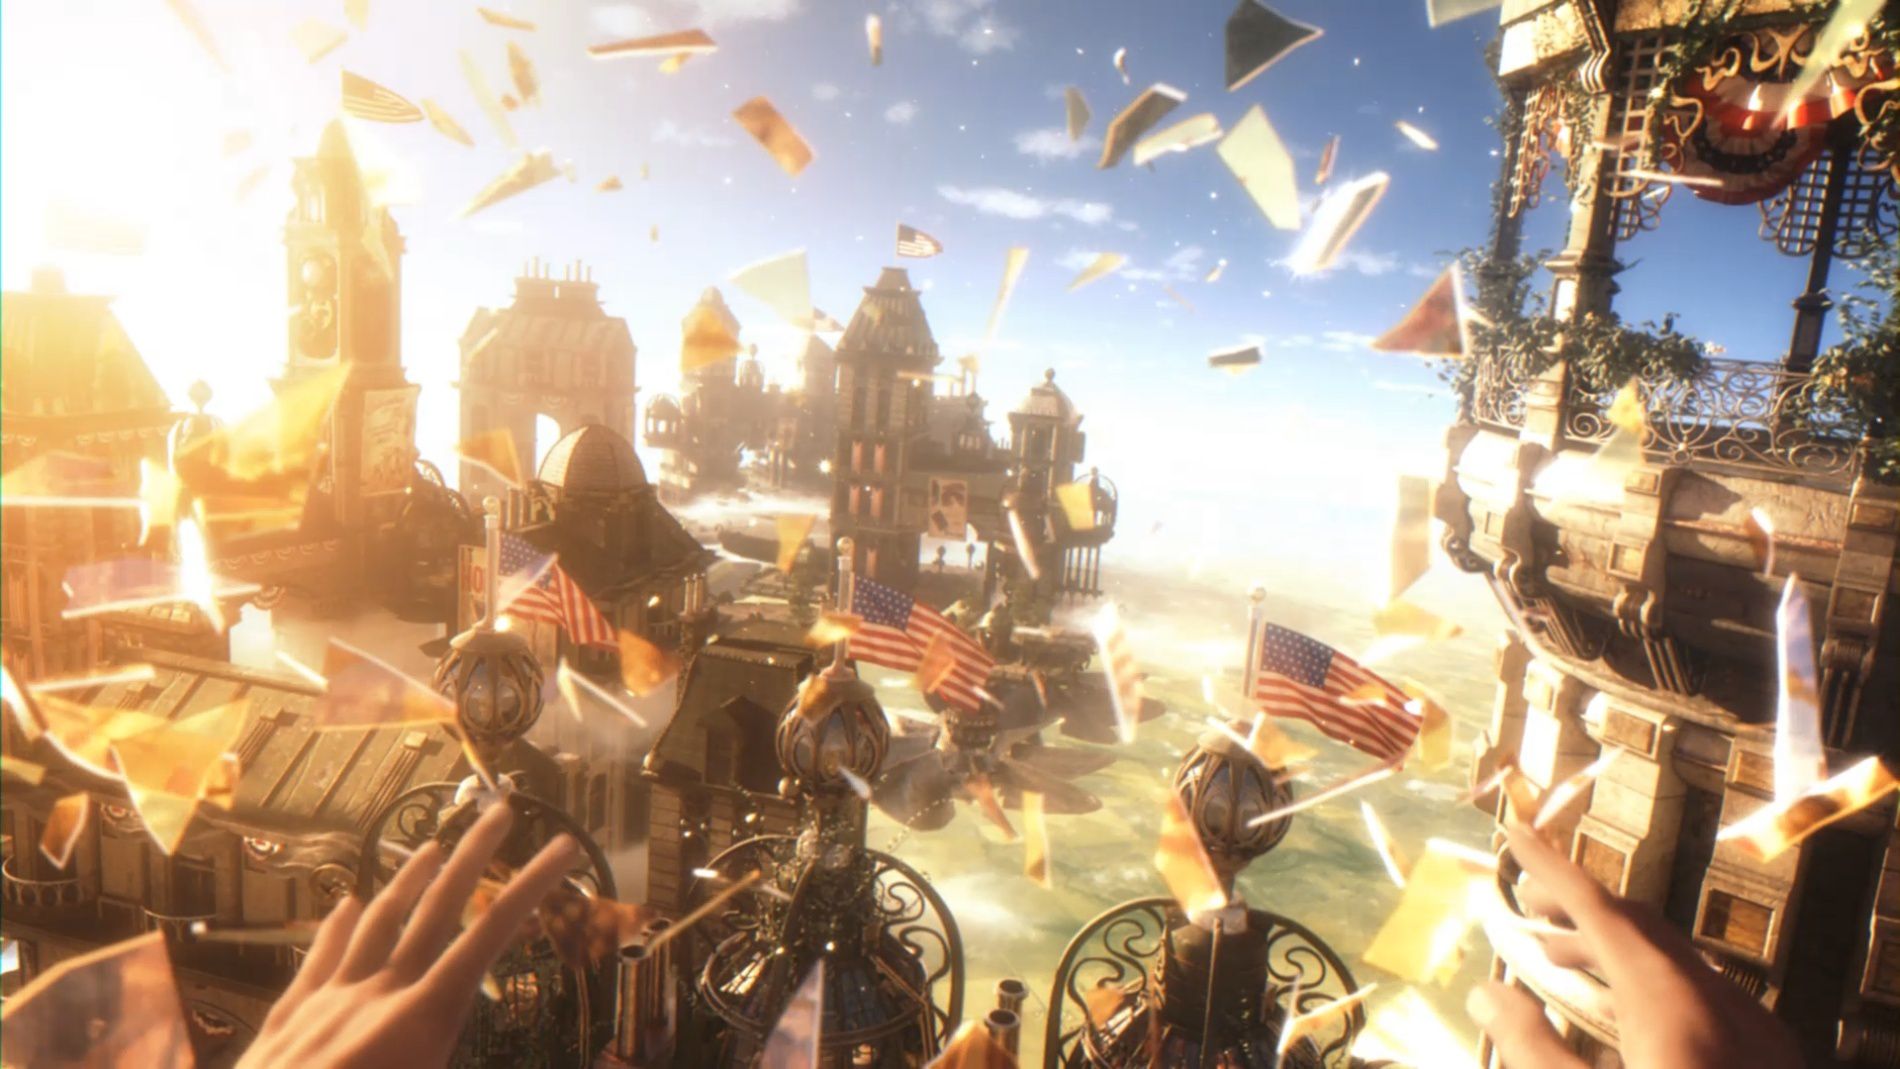 BioShock Infinite is a gorgeous game. It's graphics and cinematic are comparable to few. 